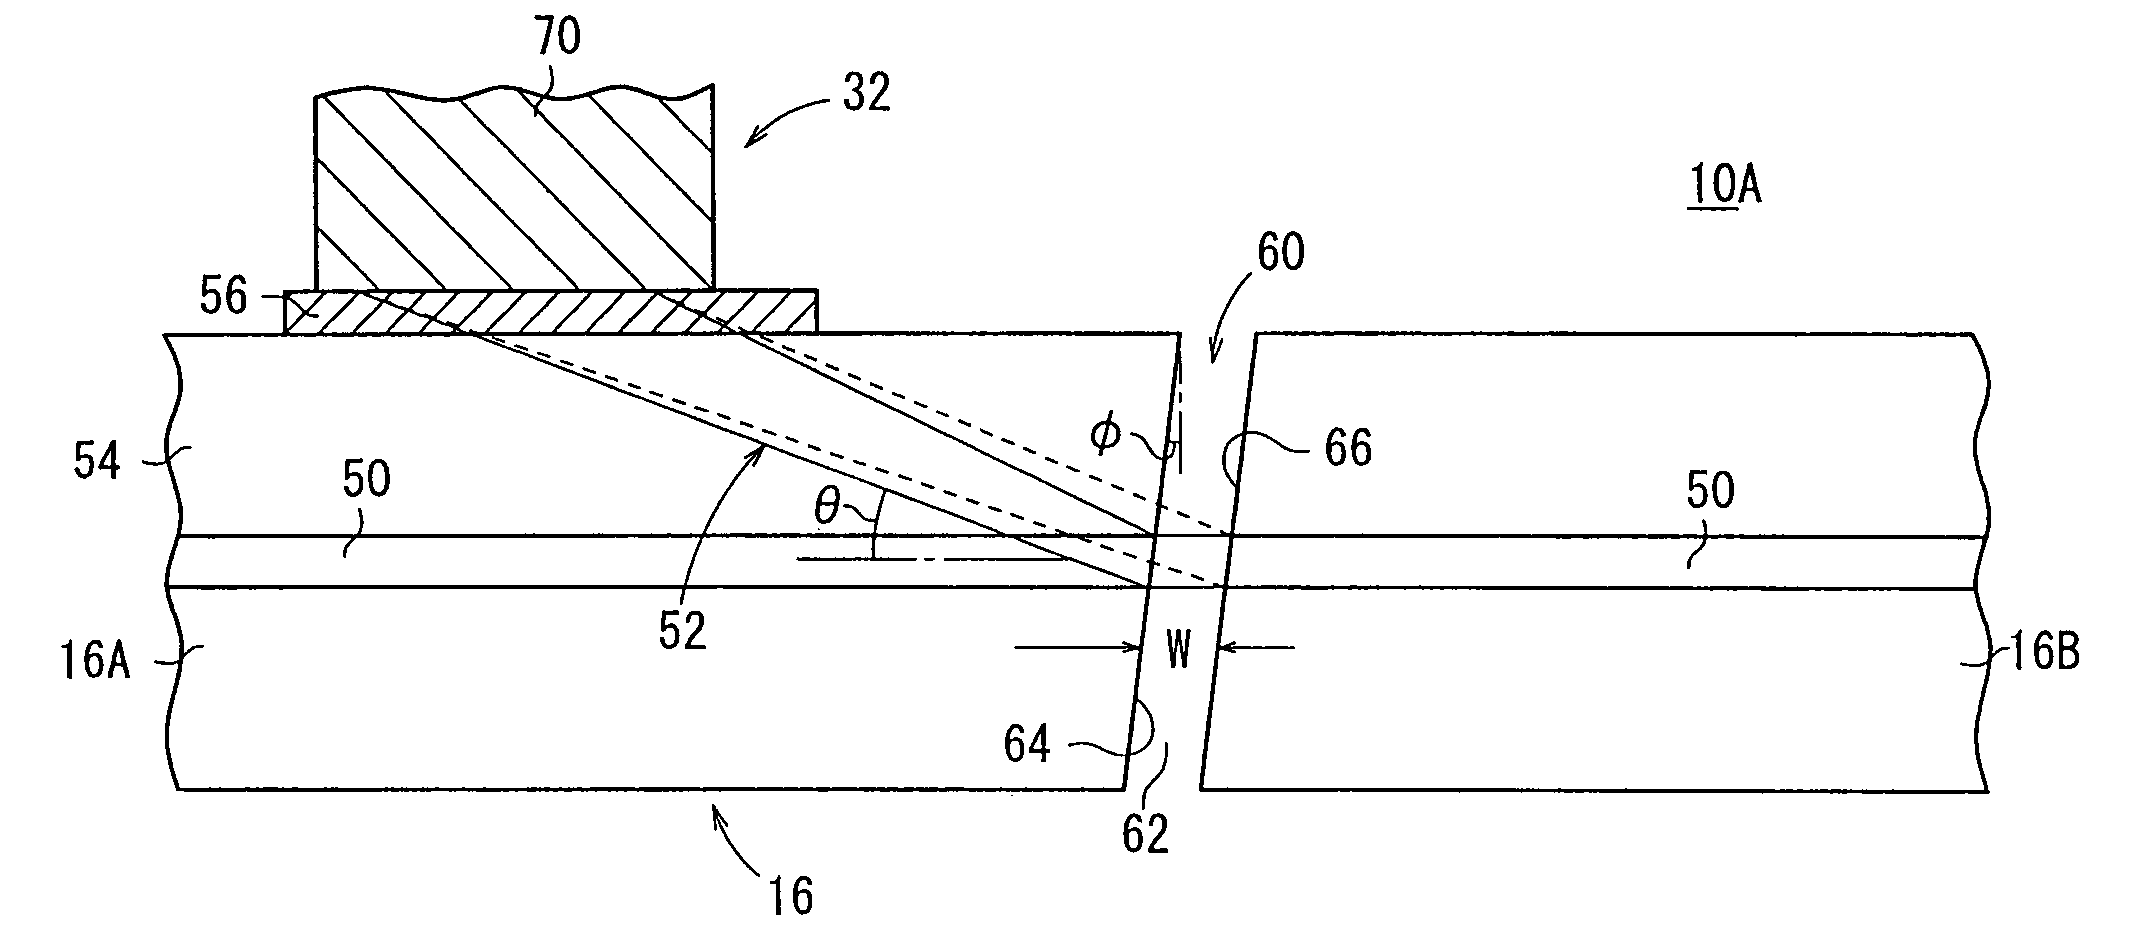 Optical device and method of producing the same